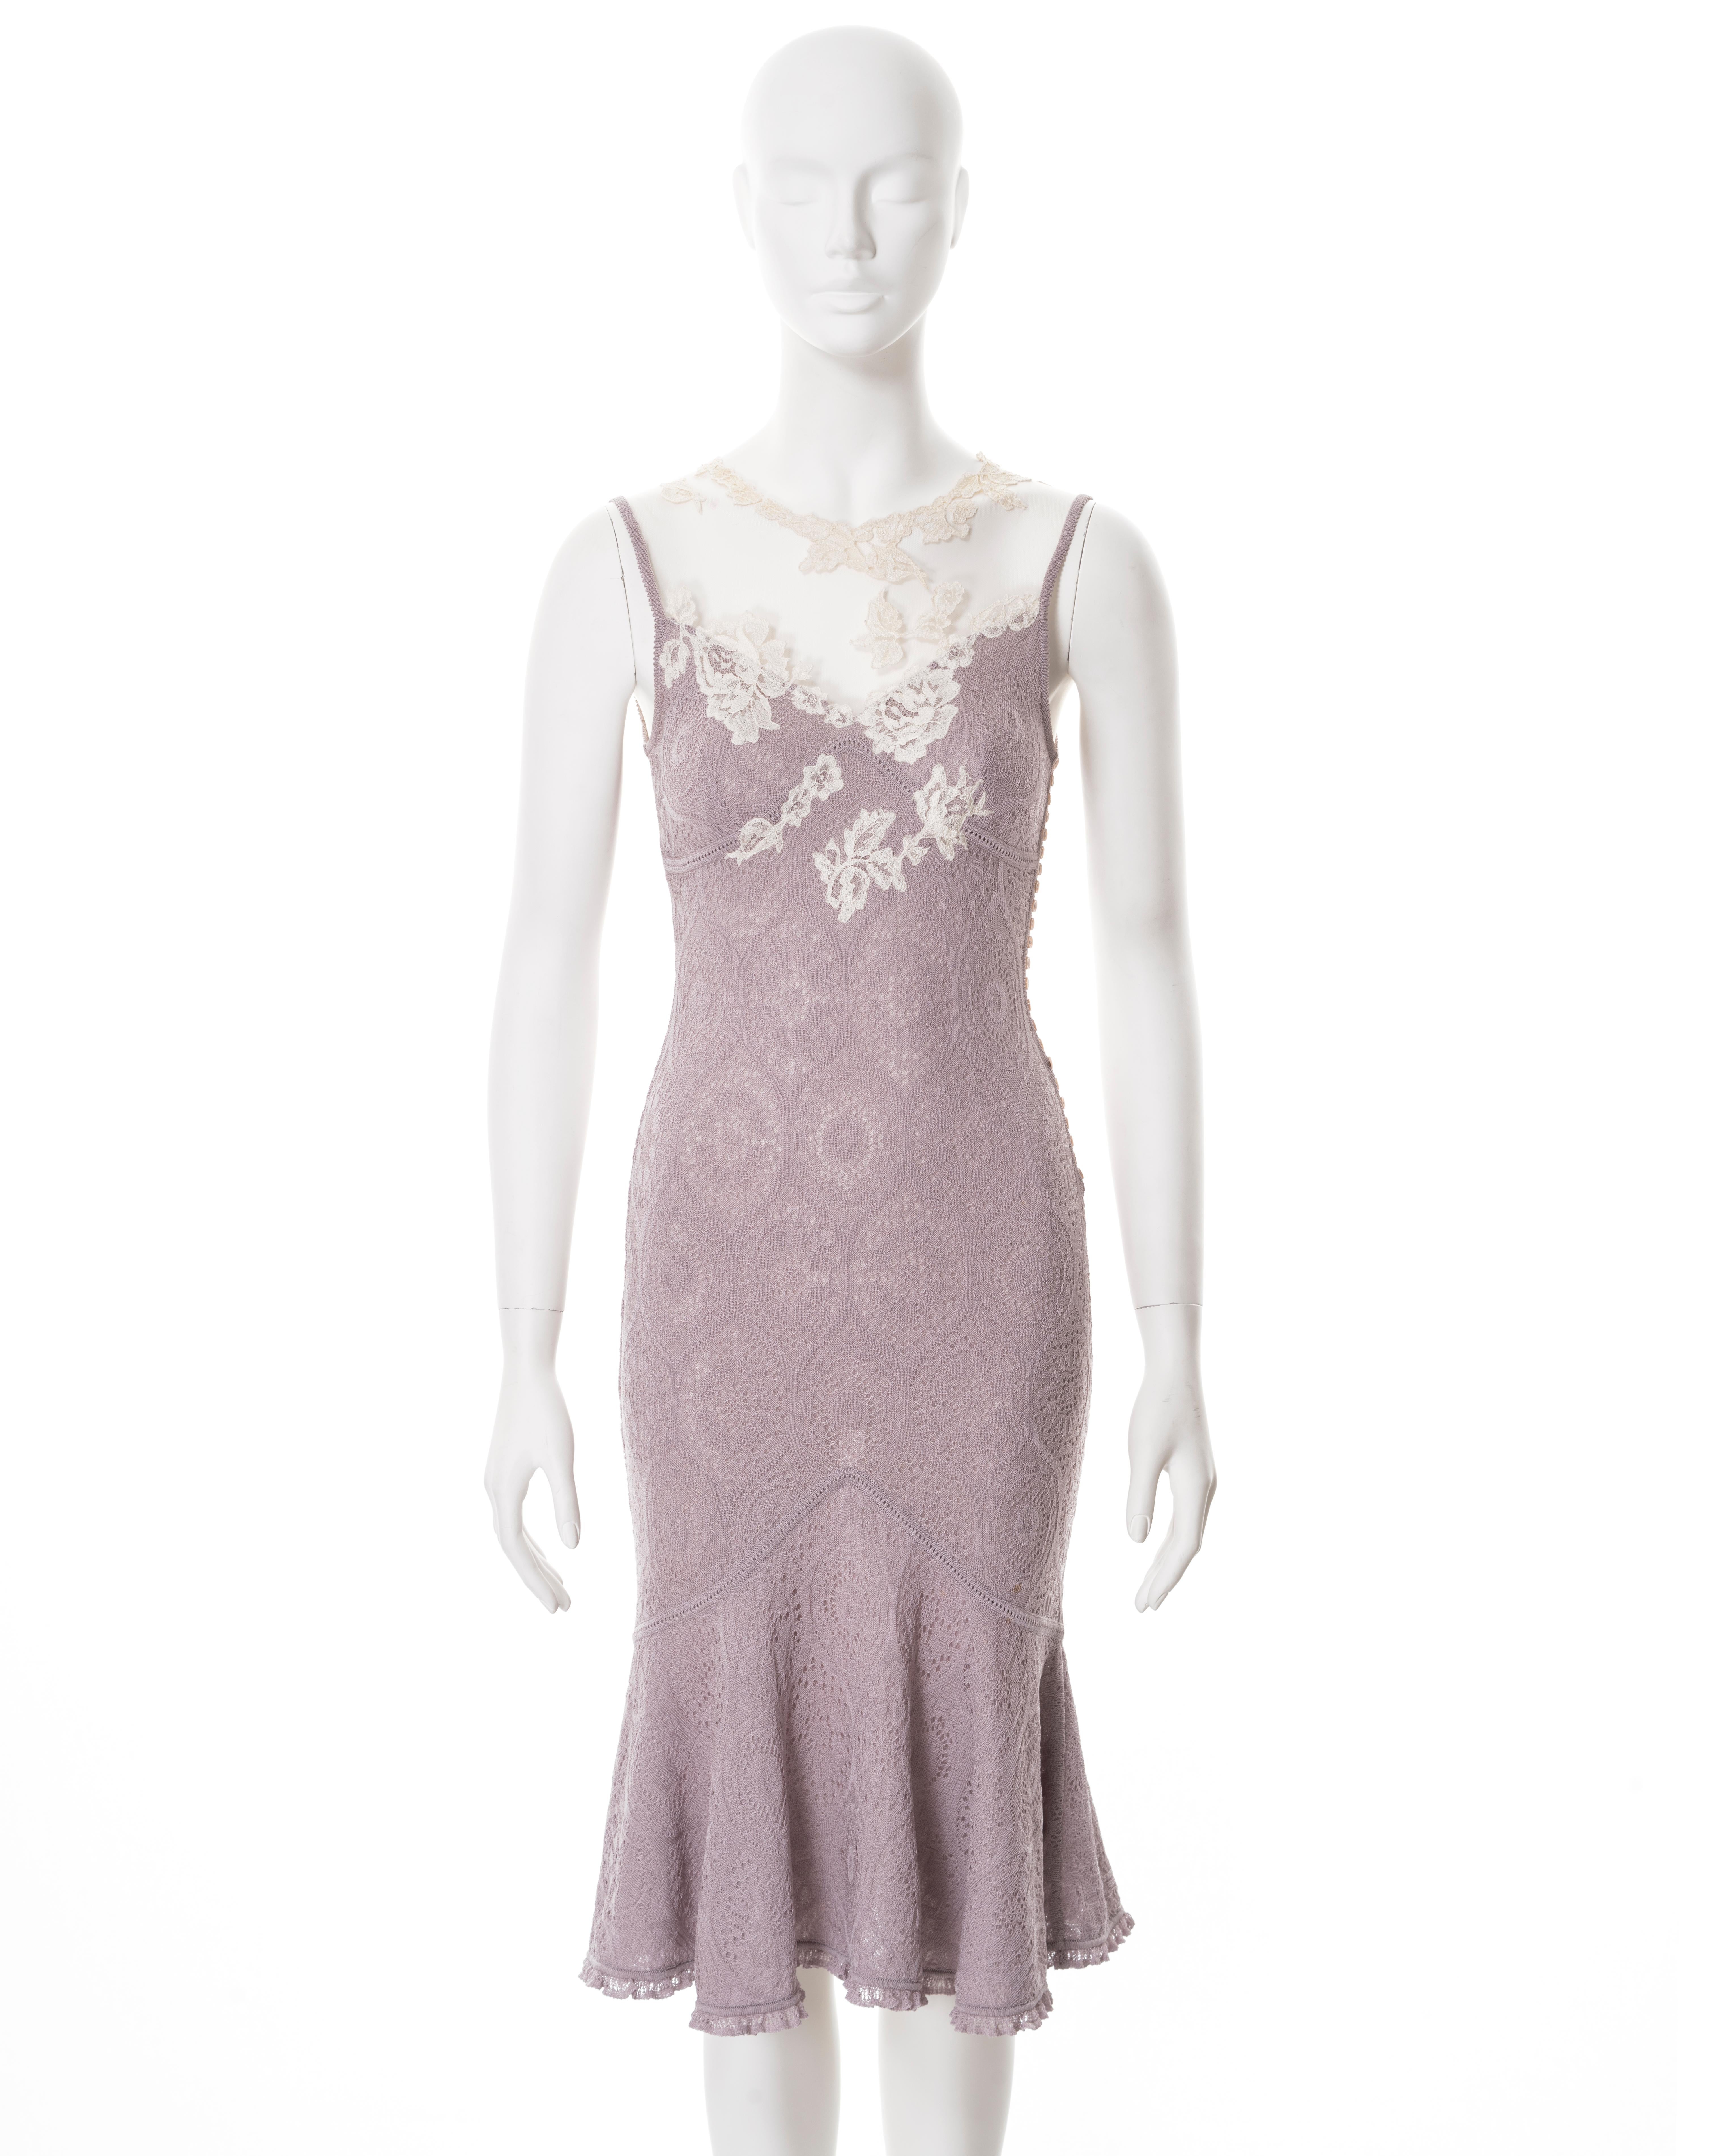 ▪ John Galliano dress
▪ Spring-Summer 1998
▪ Constructed from lilac viscose knitted lace 
▪ Ivory mesh with lace appliqués 
▪ Multiple button closures 
▪ Flounce skirt 
▪ Size approx. Small
▪ Made in France  

All photographs in this listing